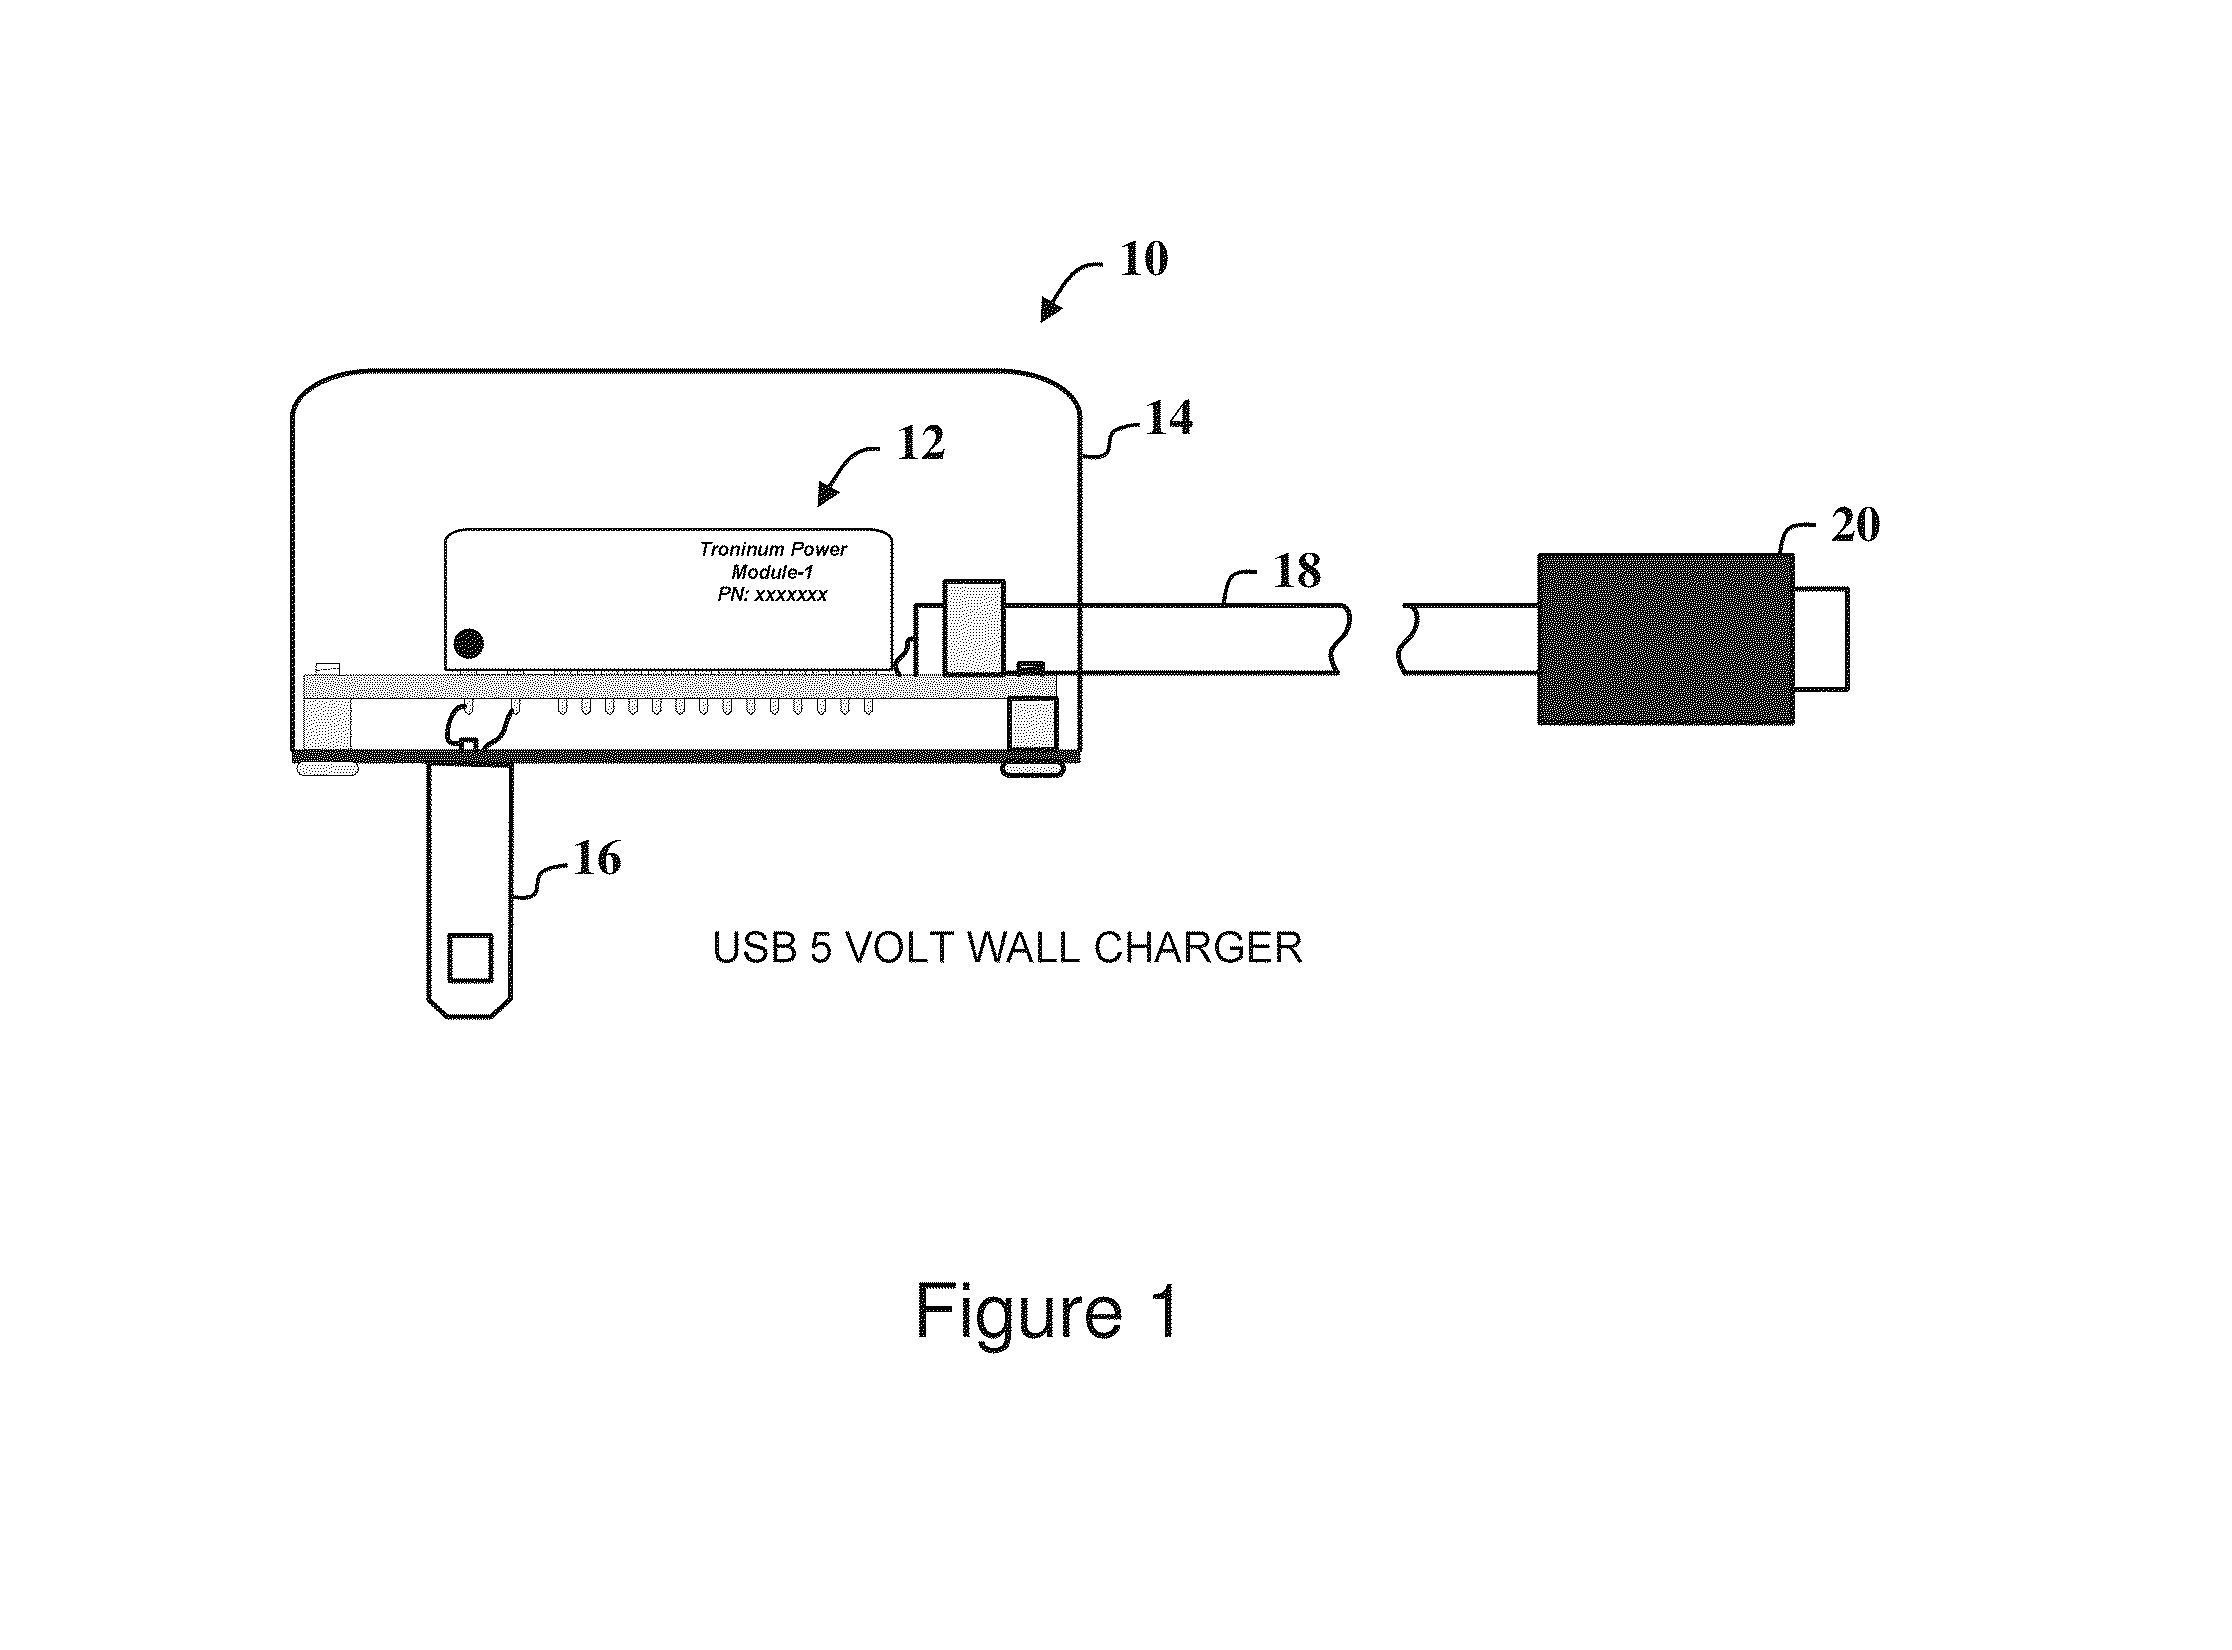 Electrical circuit for delivering power to consumer electronic devices